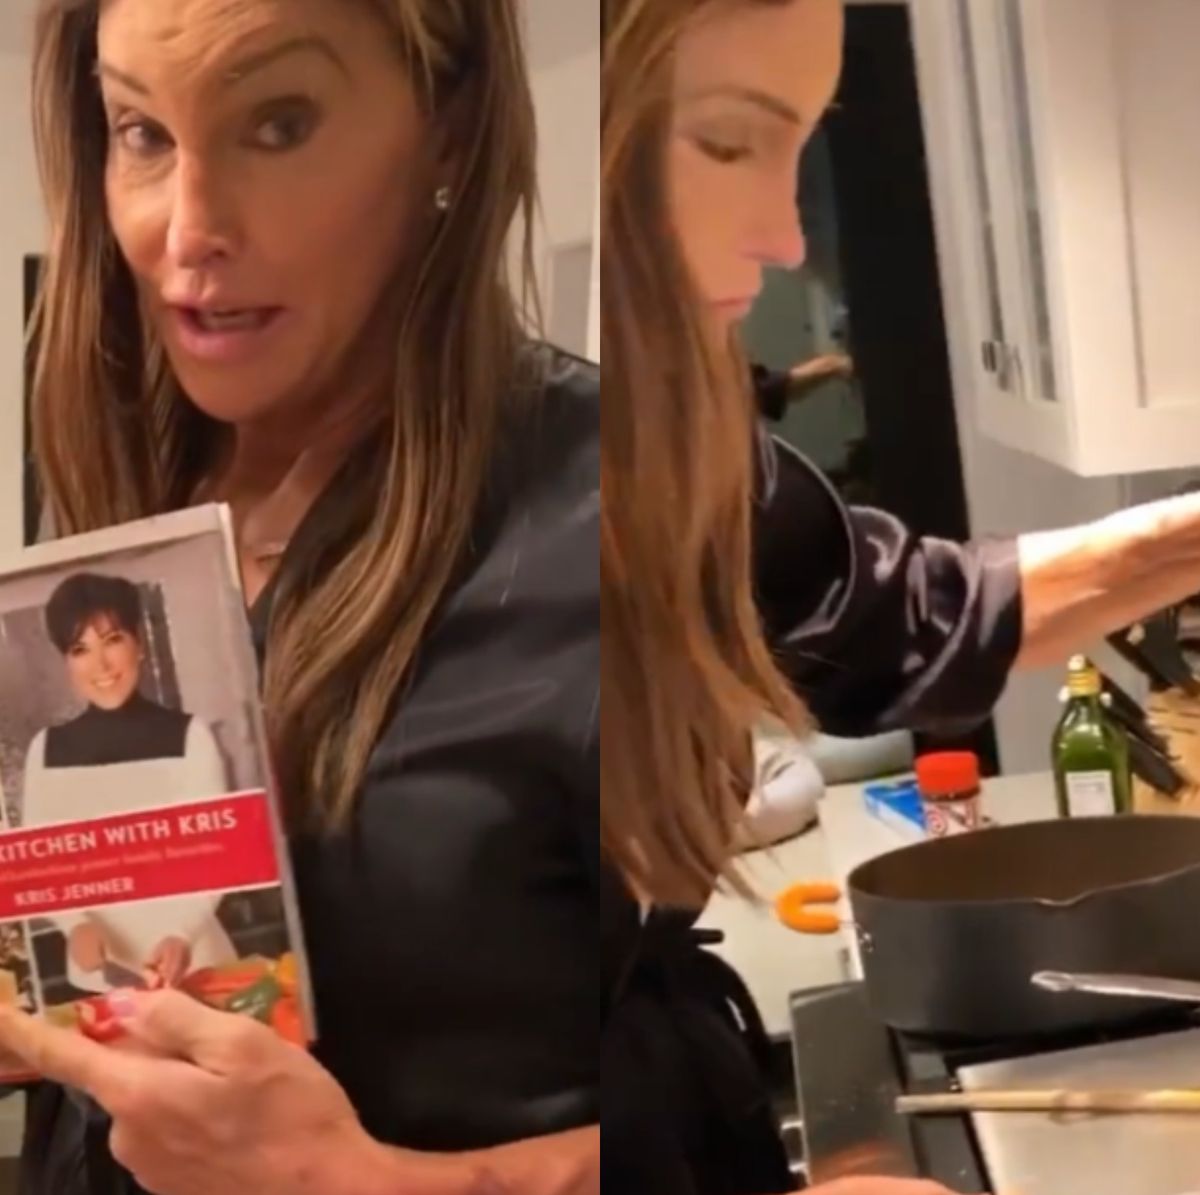 Caitlyn Jenner Had To Look In Kris Jenner's Cookbook For A Pasta Recipe